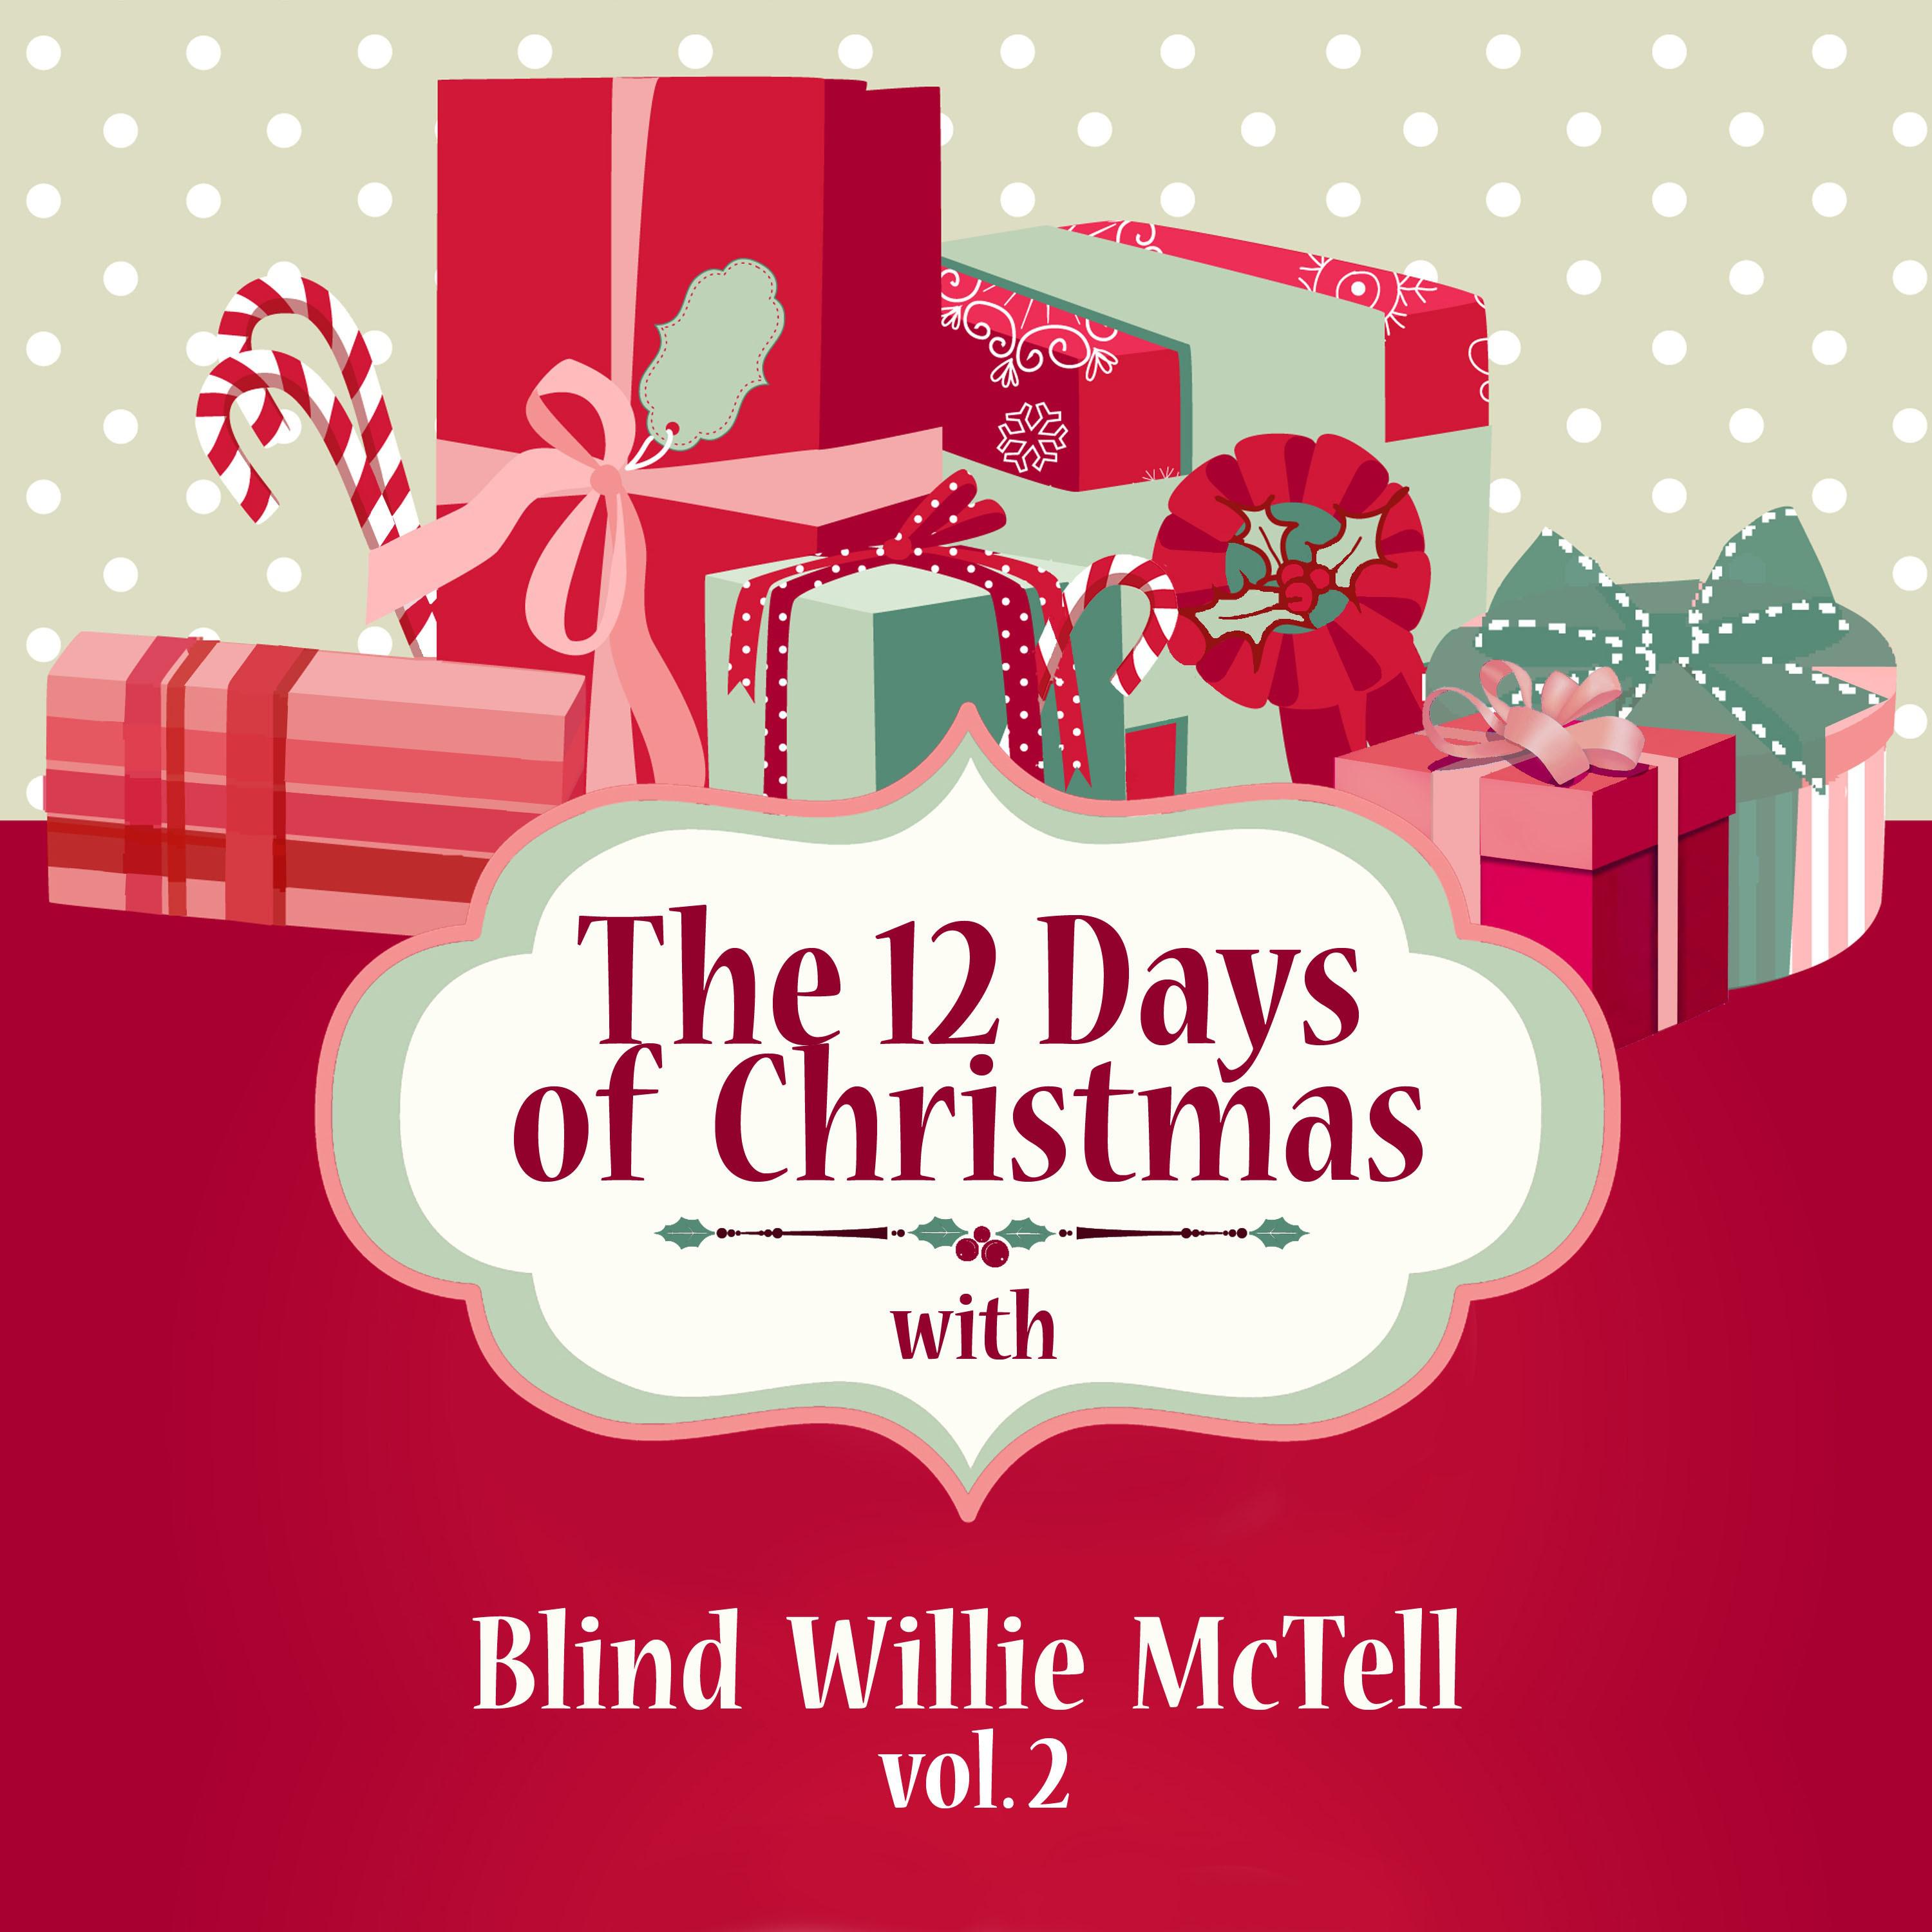 The 12 Days of Christmas with Blind Willie Mctell, Vol. 2